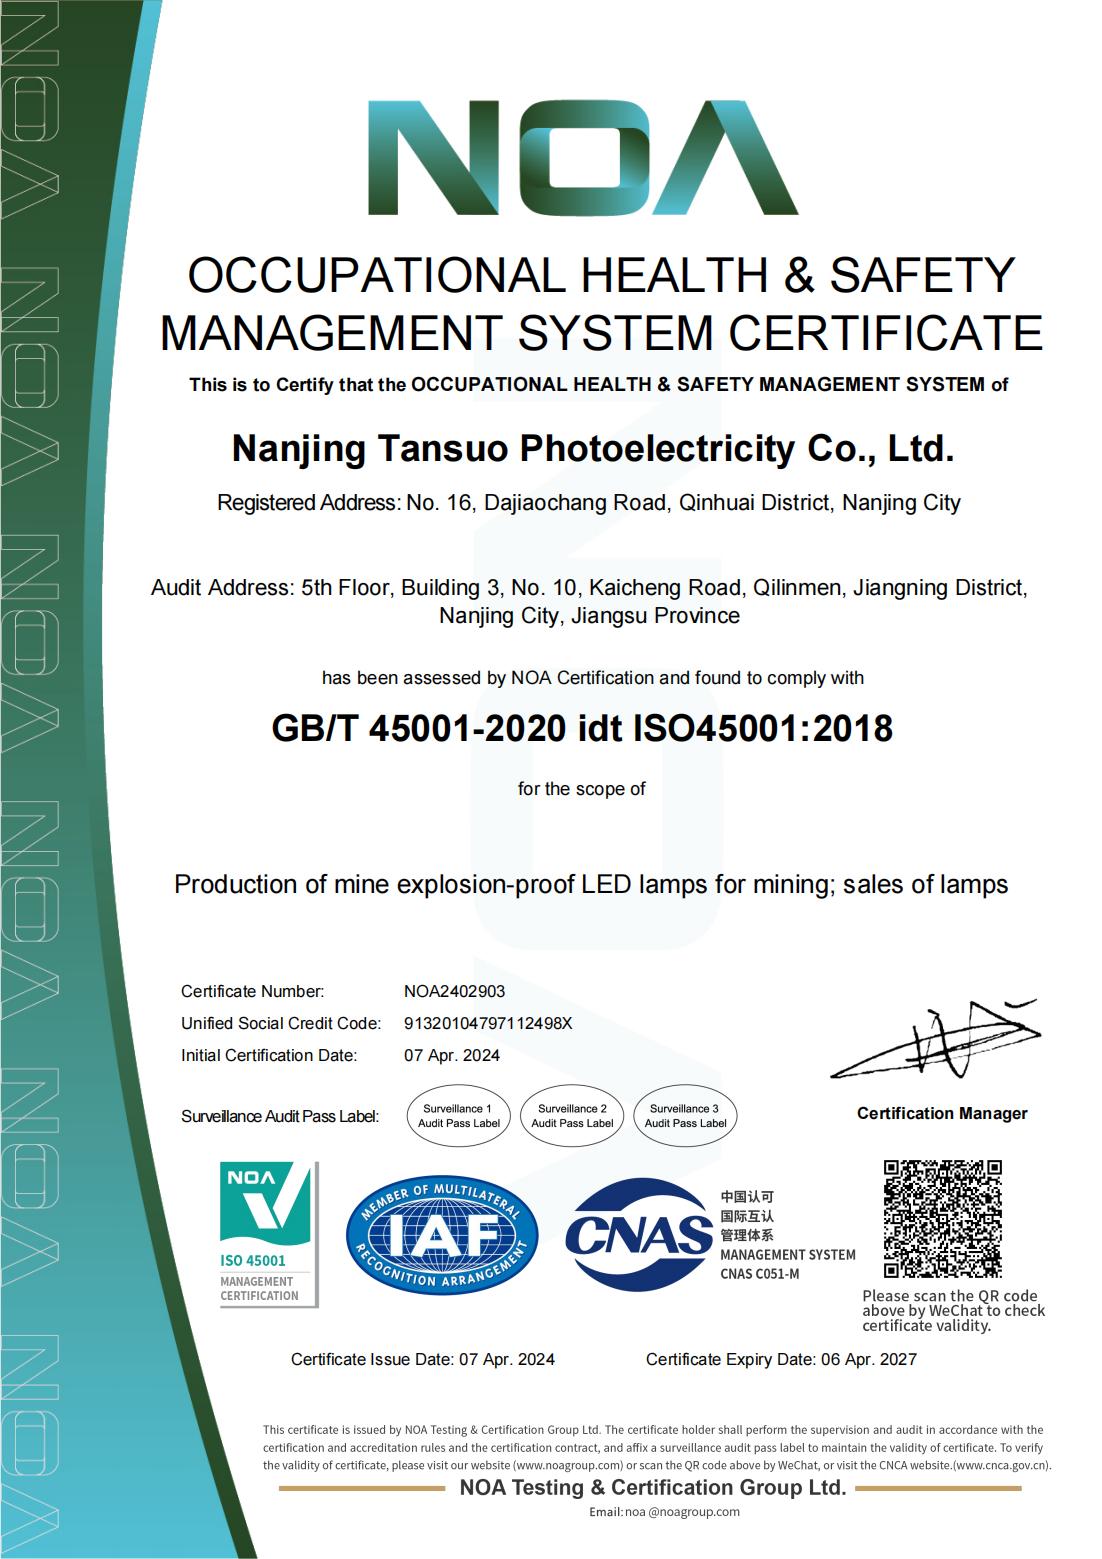 Congratulations to our company for obtaining the Occupational Health and Safety Management System Certification!